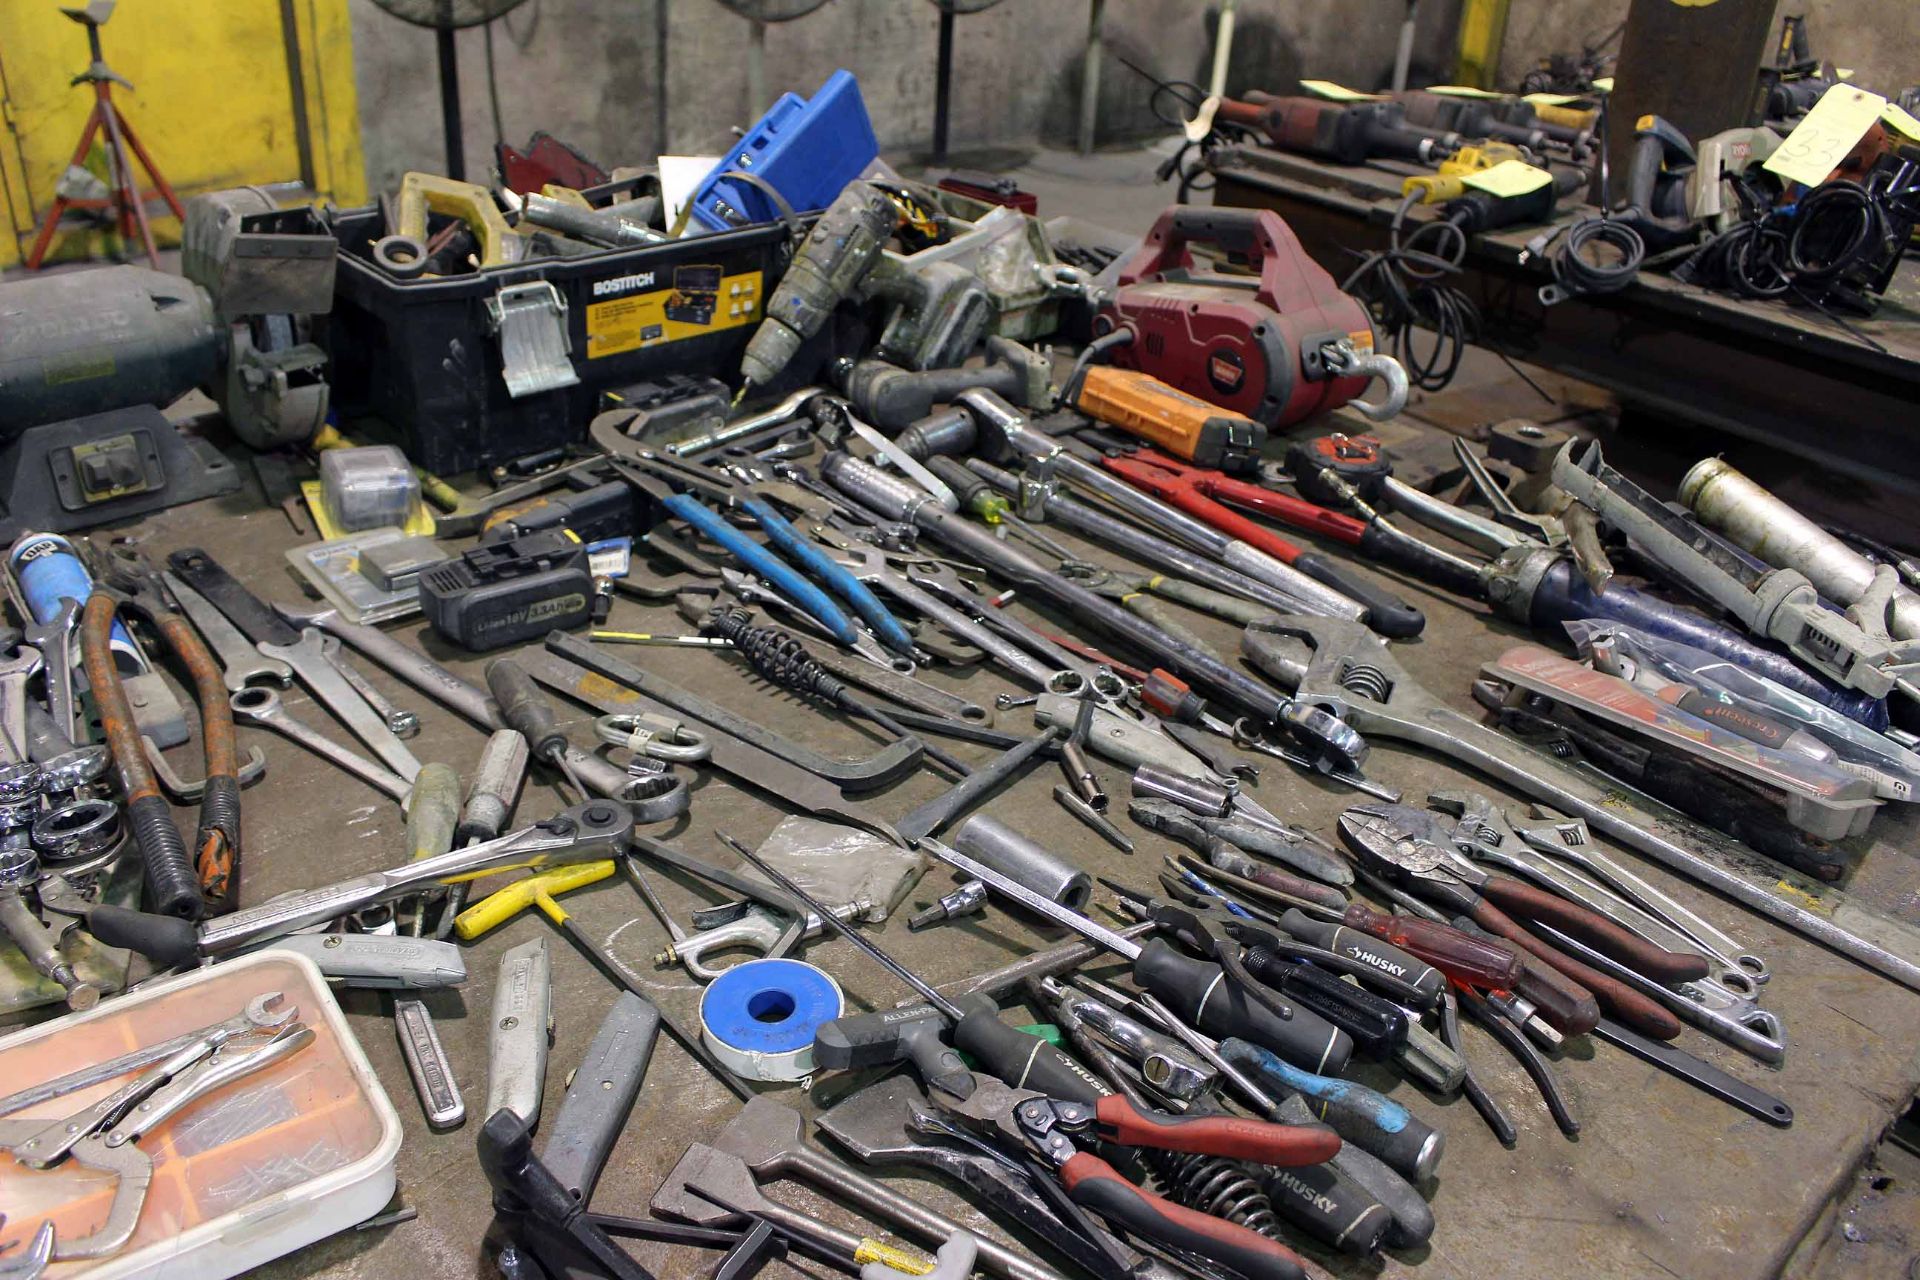 LOT CONSISTING OF: misc. hand tools, wrenches, pliers, sockets, electric drills, etc. - Image 3 of 4